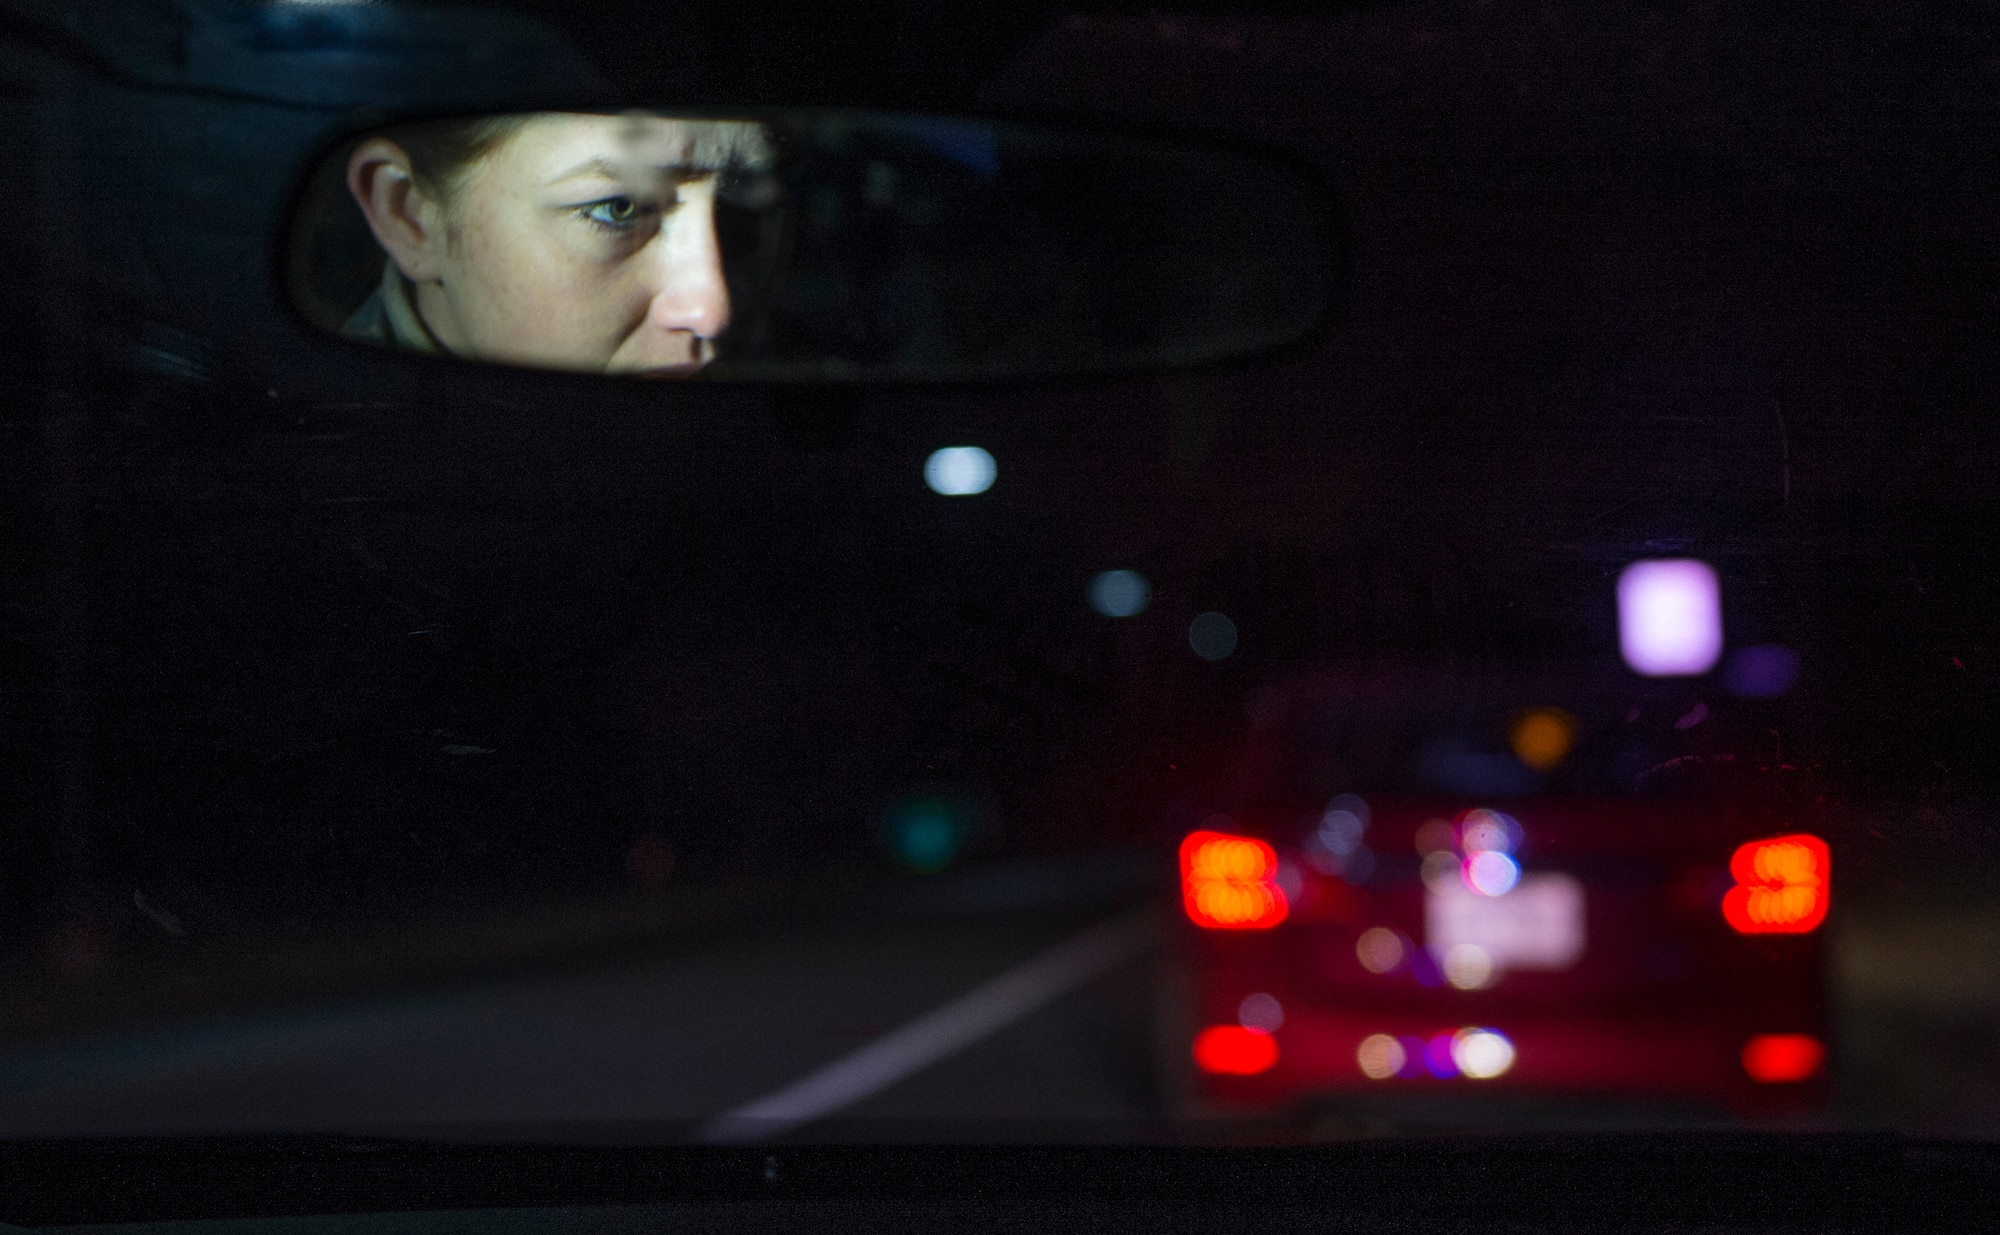 Airman 1st Class Kaitlyn Evans, an 11th Security Forces Squadron patrolman, prepares to approach a vehicle during a routine traffic violation while on night-shift duty at Joint Base Andrews, Maryland. During the evening hours, her role as a patrolman is to secure the base and maintain the safety of personnel. Her attention to detail and military discipline serves as key components to maintaining the demands of owning a horse and performing well at work. (U.S. Air Force photo/Staff Sgt. Vernon Young Jr.)